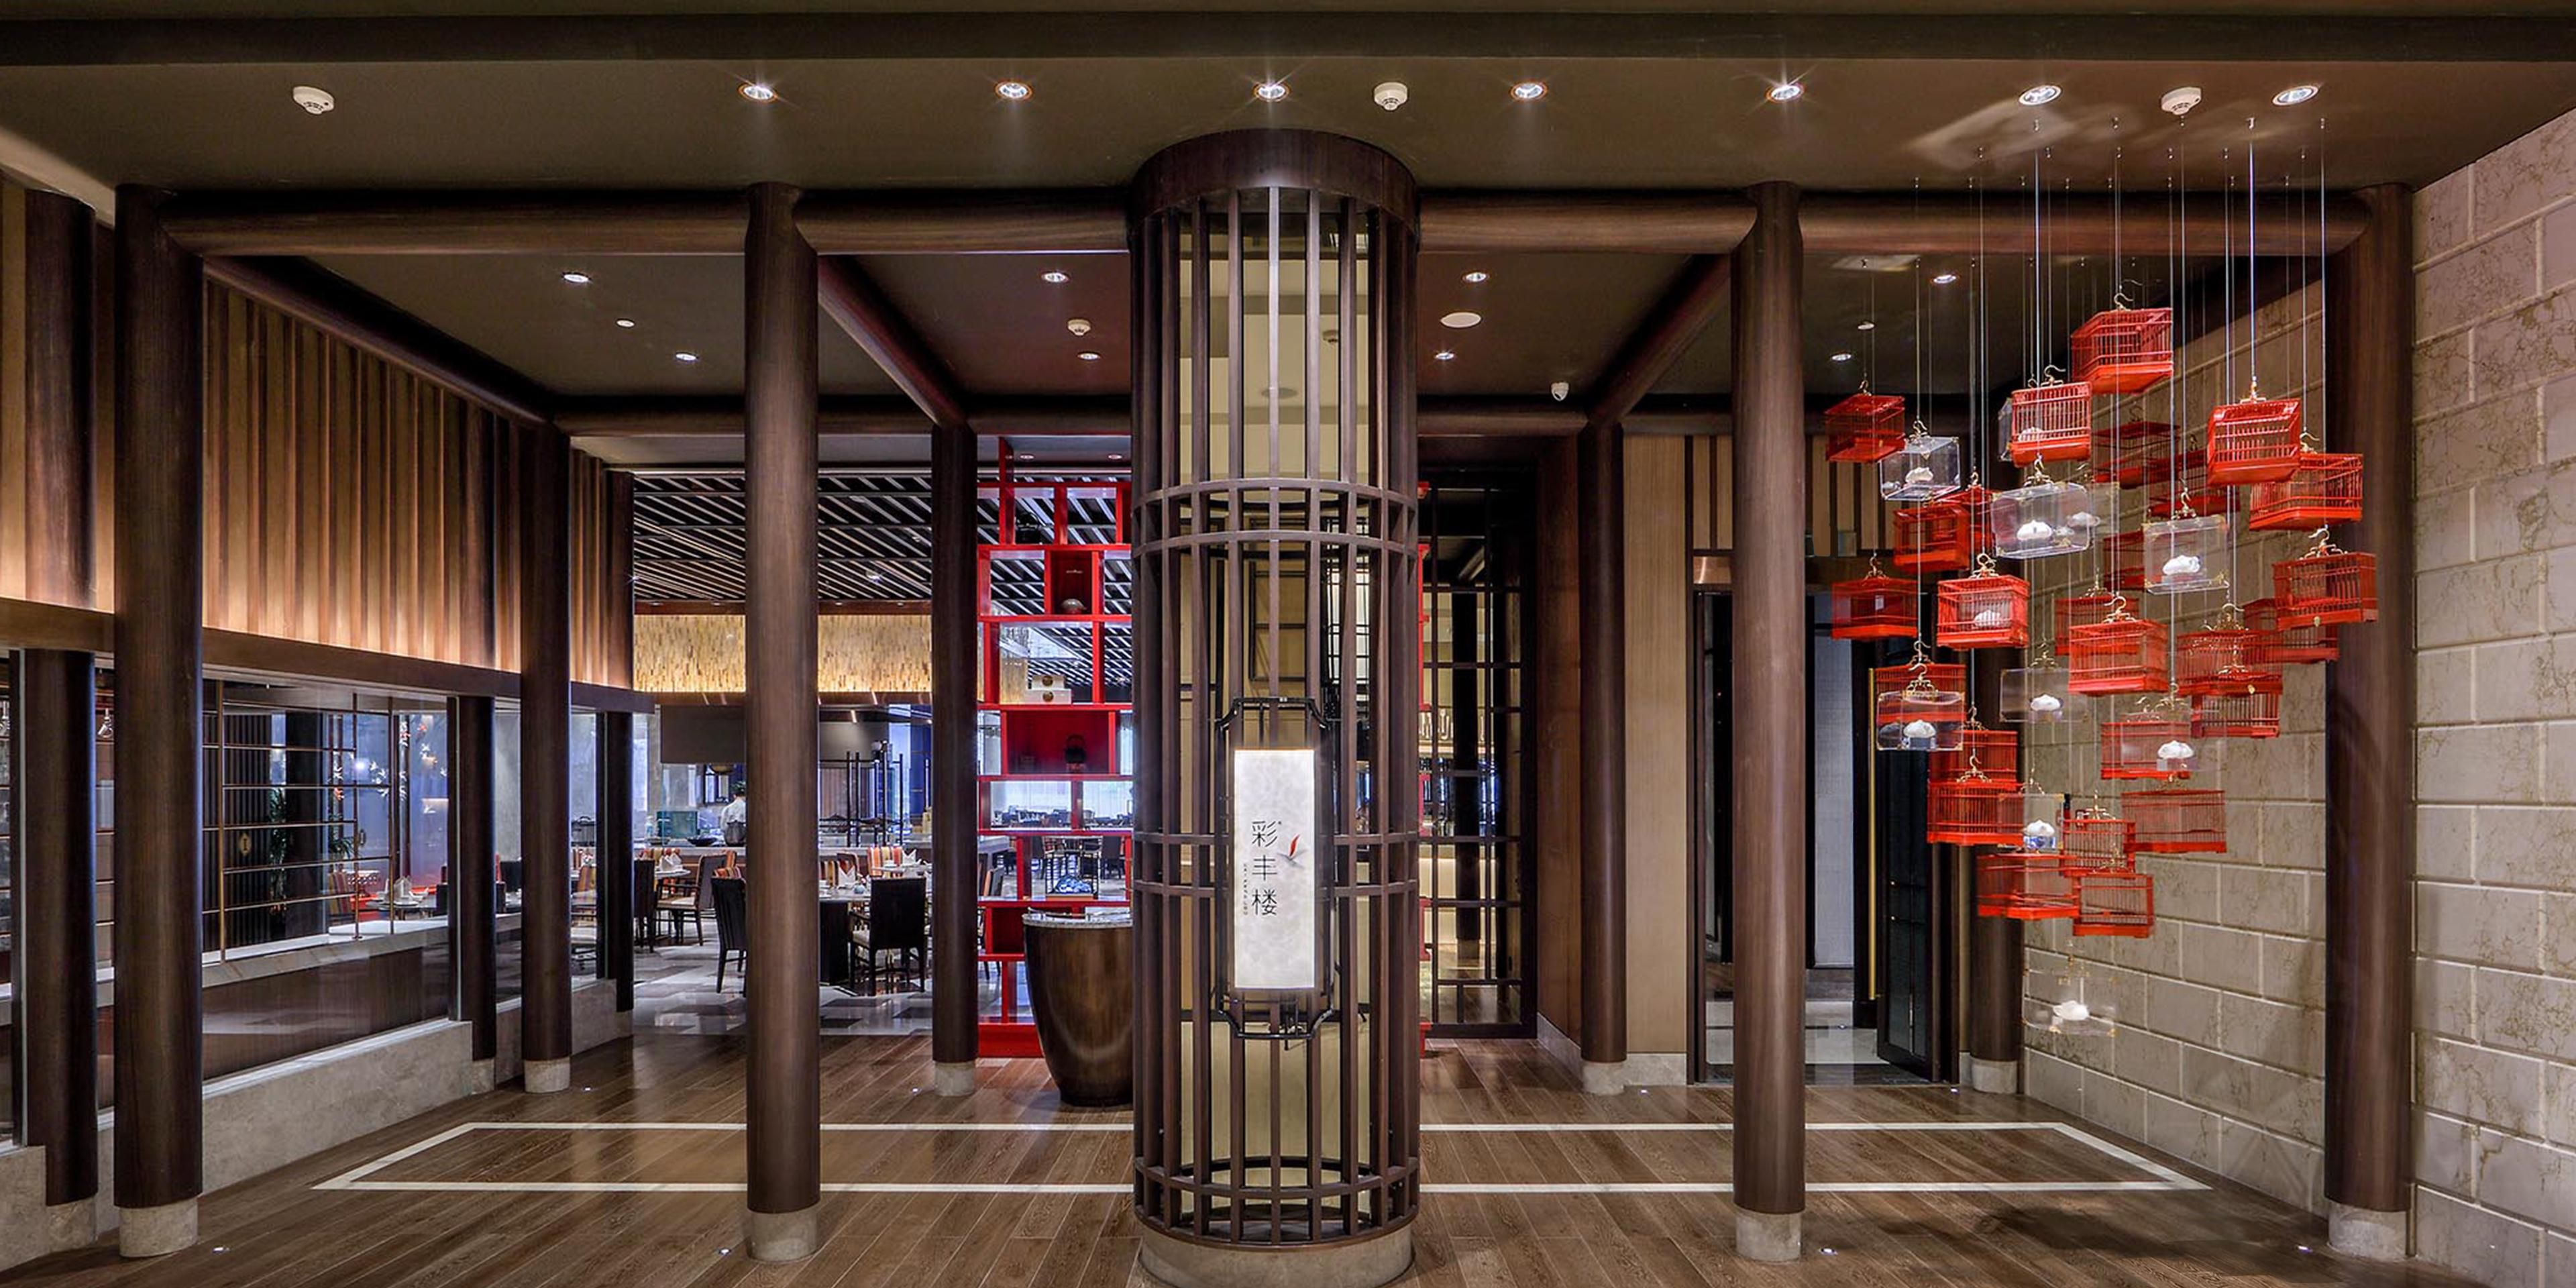 CAI FENG LOU is a modern formal Chinese restaurant operates by IHG, 
provides consistent renowned signature dishes and guangdong / Tianjin inspired 
seasonal delights. It tailors to guests with sophisticated taste on food and 
enjoy high-end ambience.